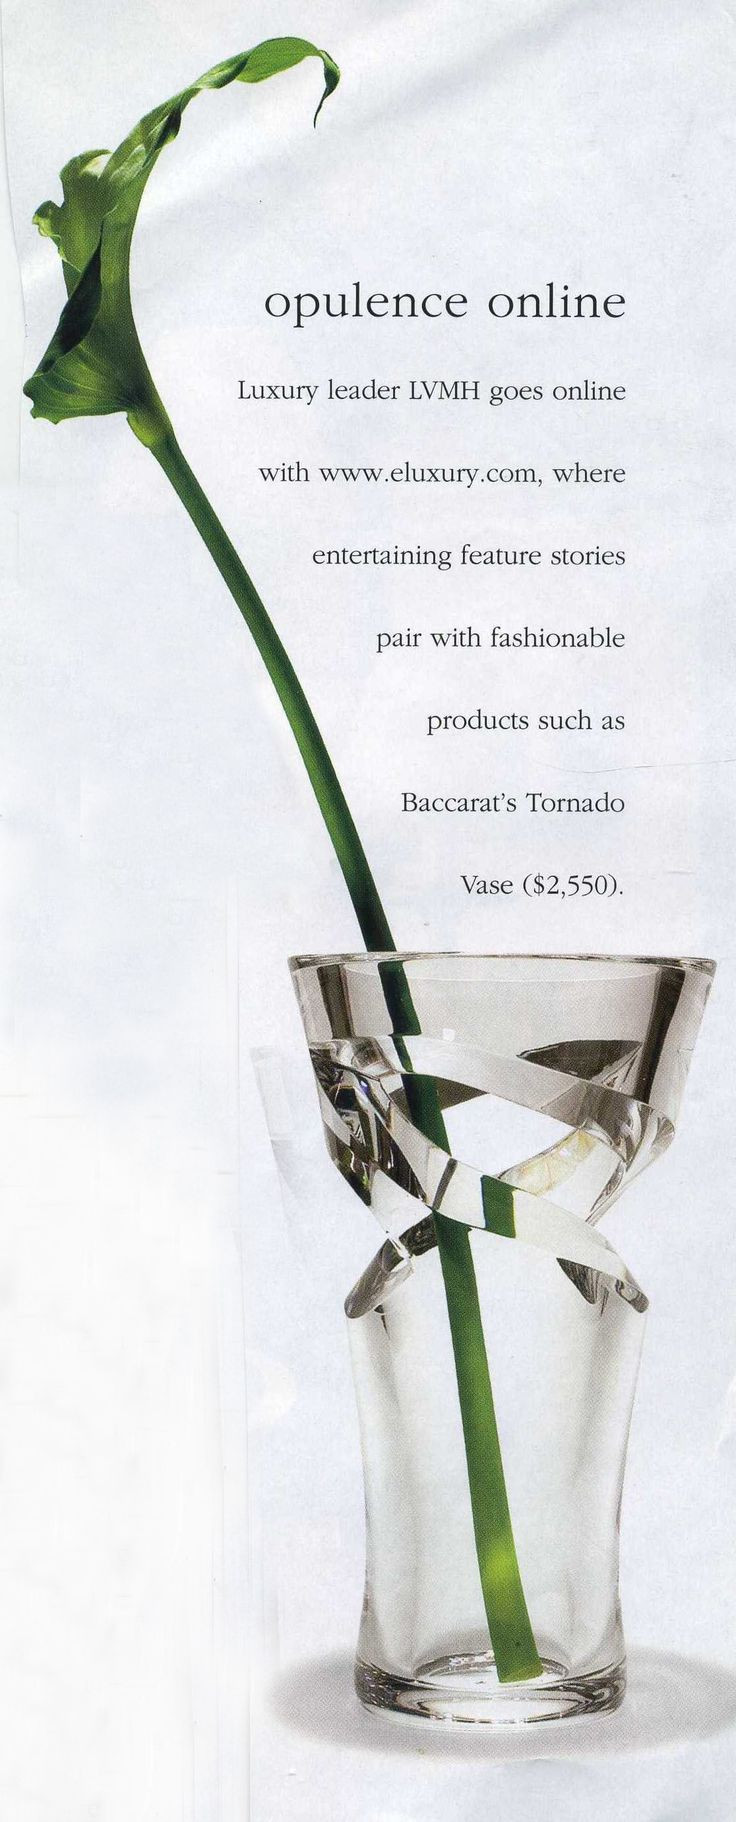 28 Awesome Baccarat Harmonie Bud Vase 2023 free download baccarat harmonie bud vase of 24 best french baccarat images on pinterest baccarat crystal ice intended for baccarat tornado vase 2550